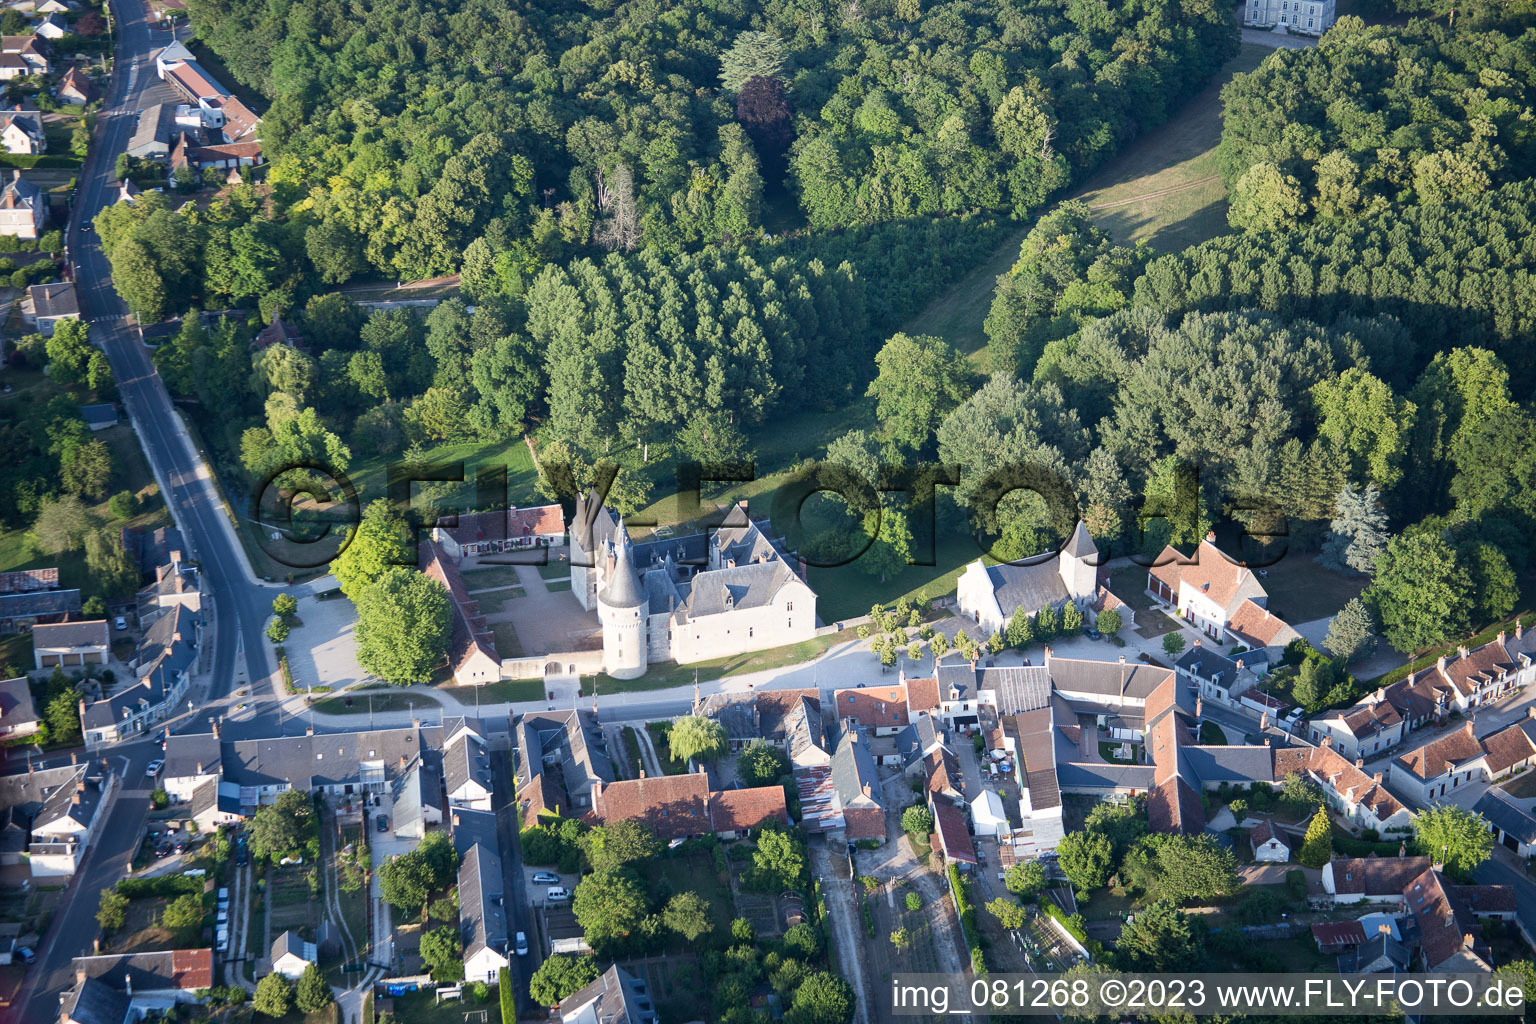 Fougères-sur-Bièvre in the state Loir et Cher, France from above